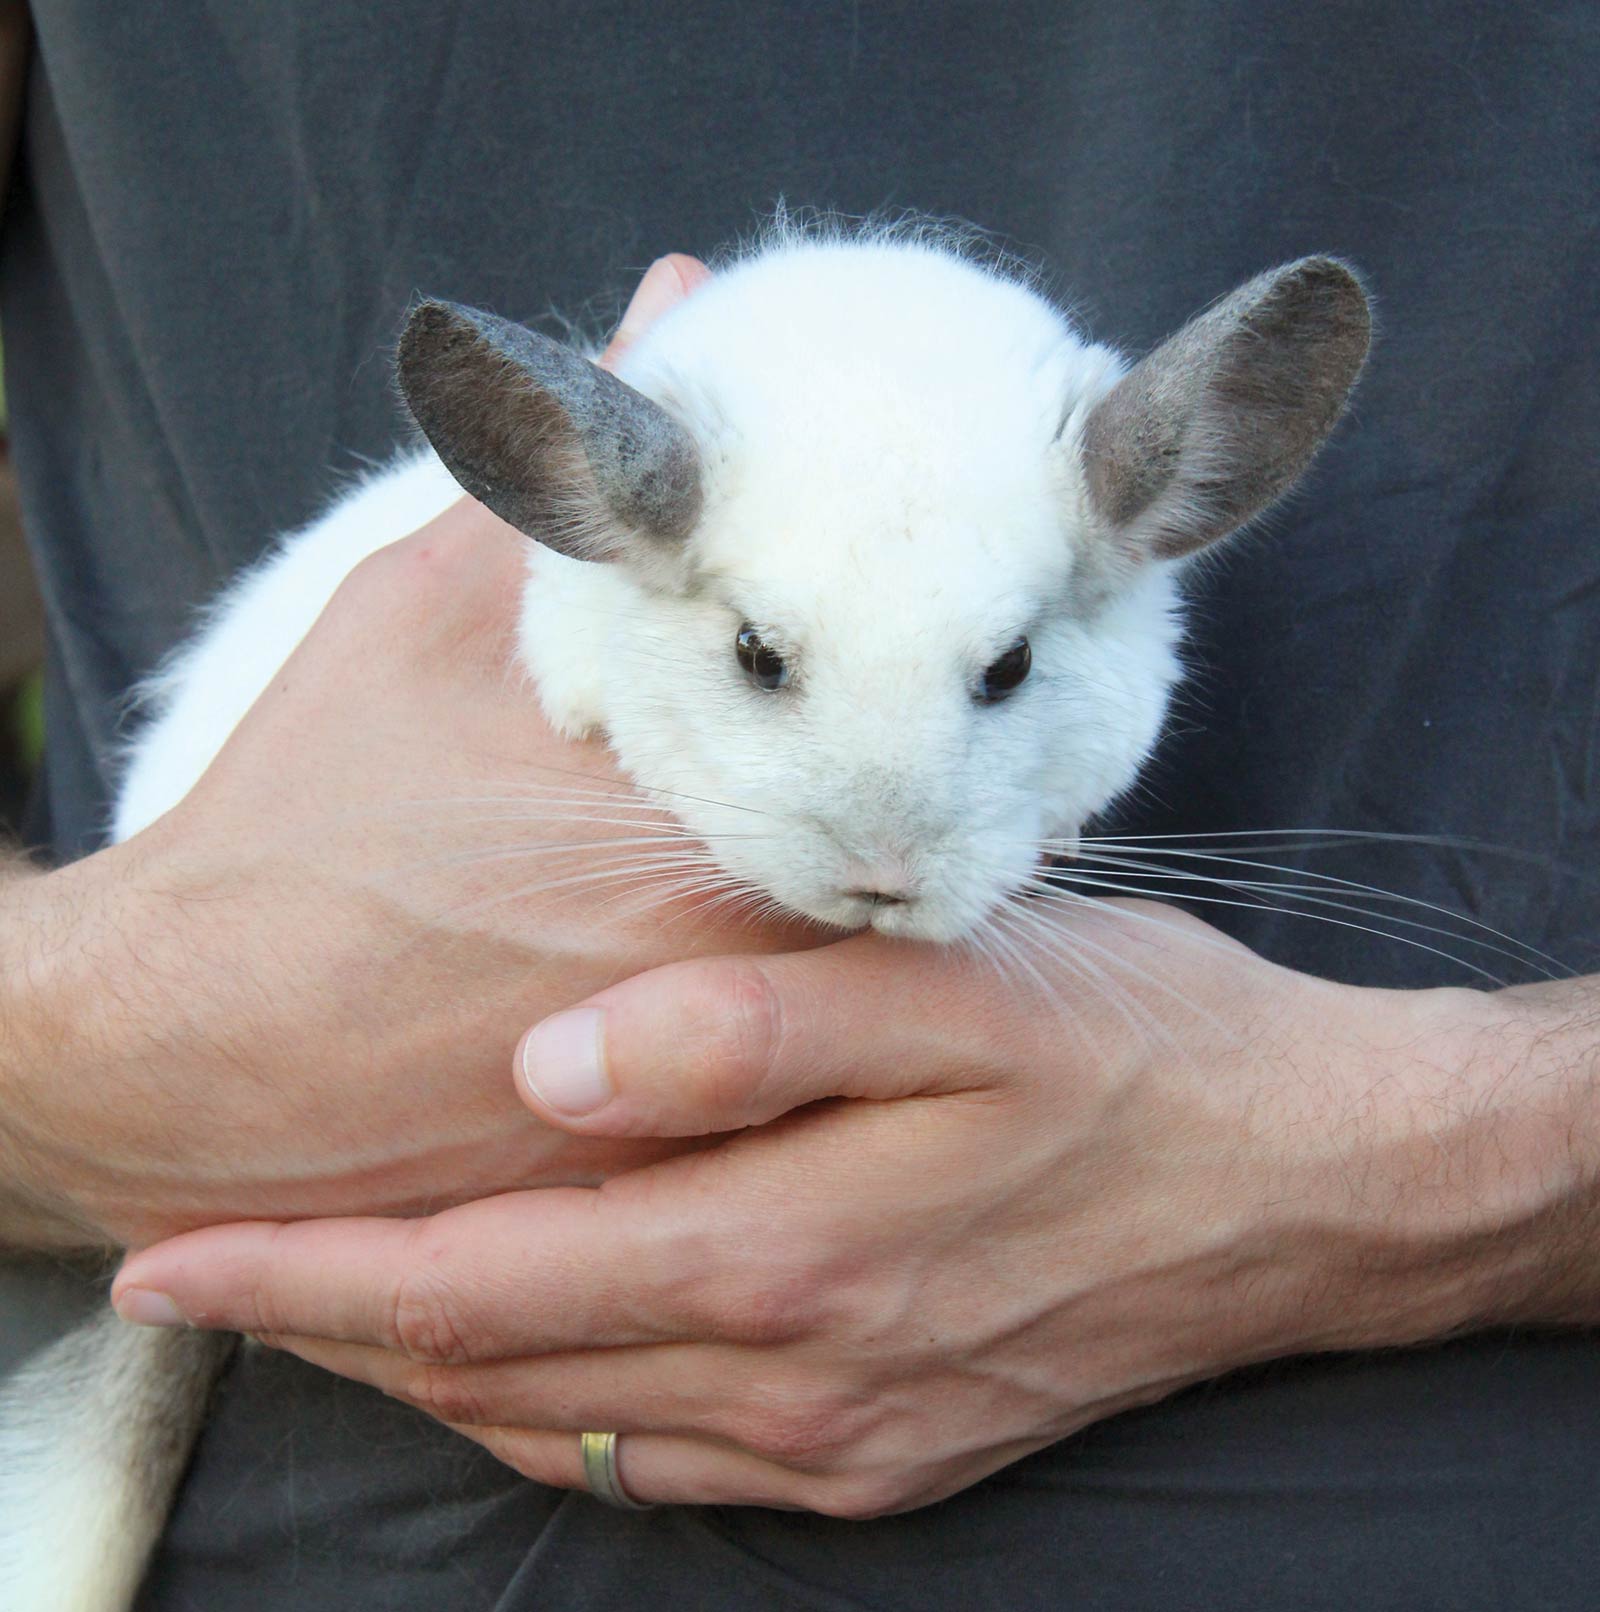 Pet chinchilla being held by its owner